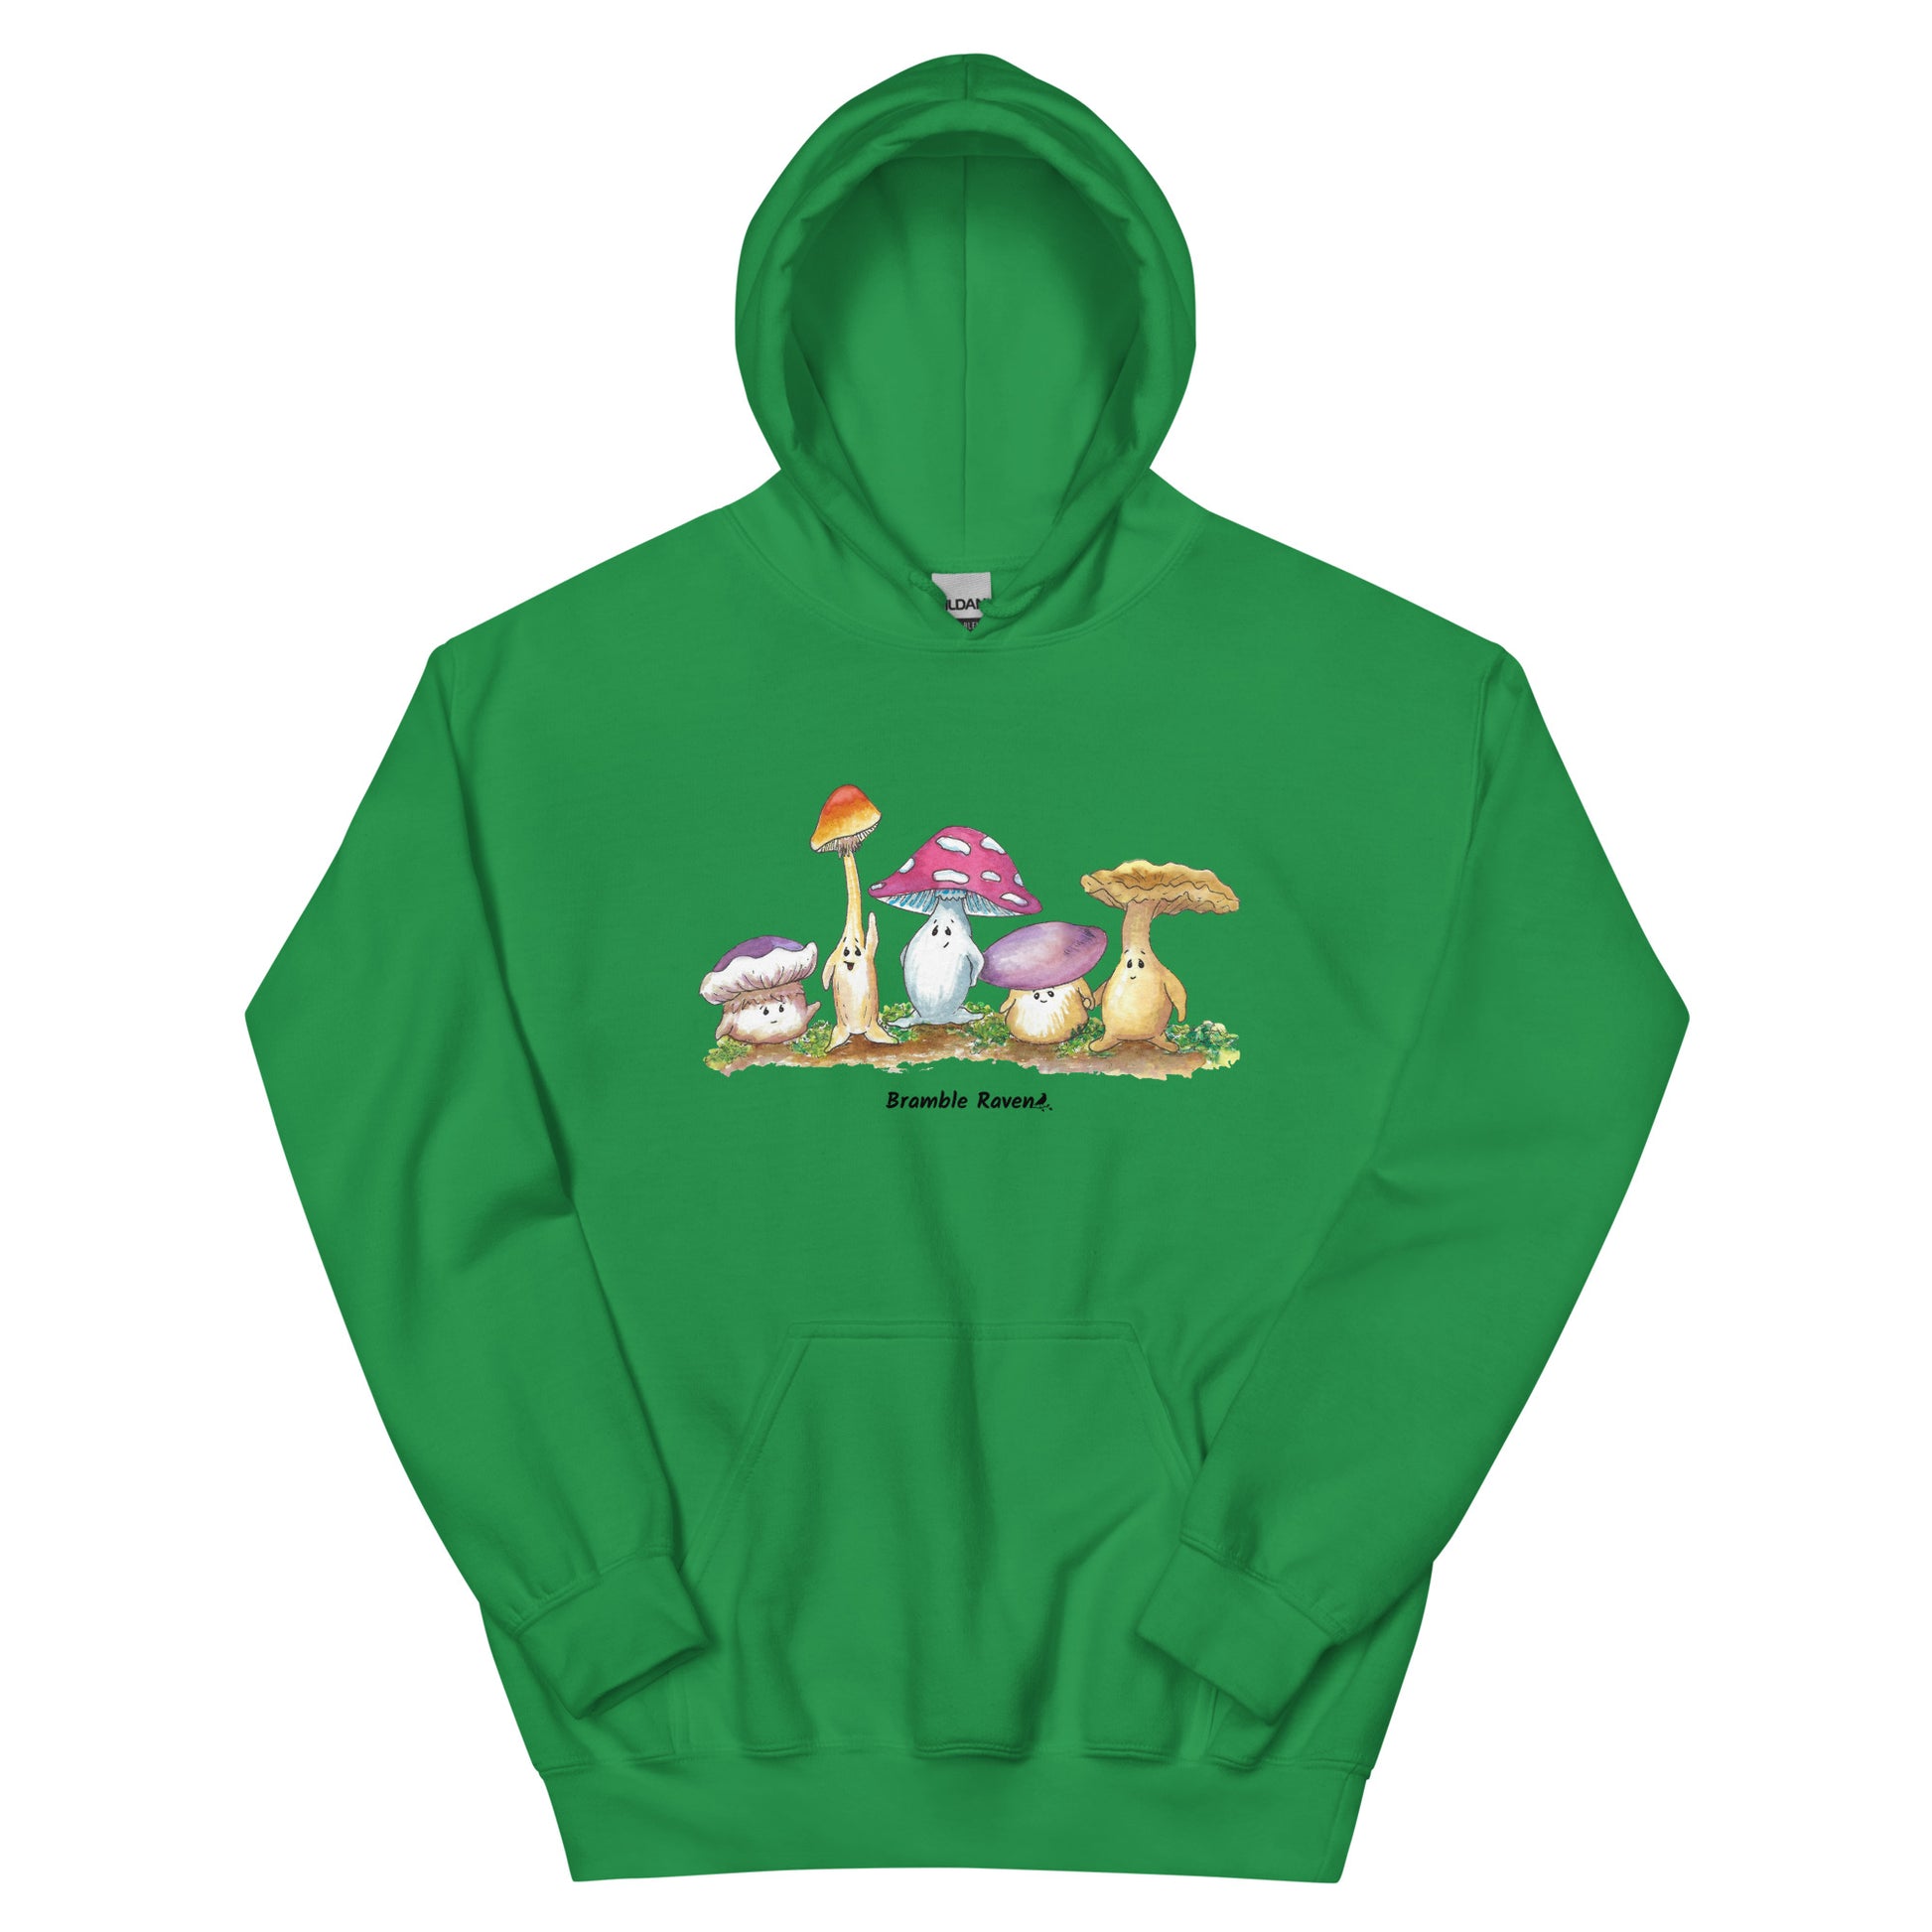 Irish green colored unisex cotton/polyester blend hoodie. Features front design of Mushy and his whimsical mushroom friends. Hoodie has double lined hood, front pouch pocket, rib knit cuffs and stretchy waistband.